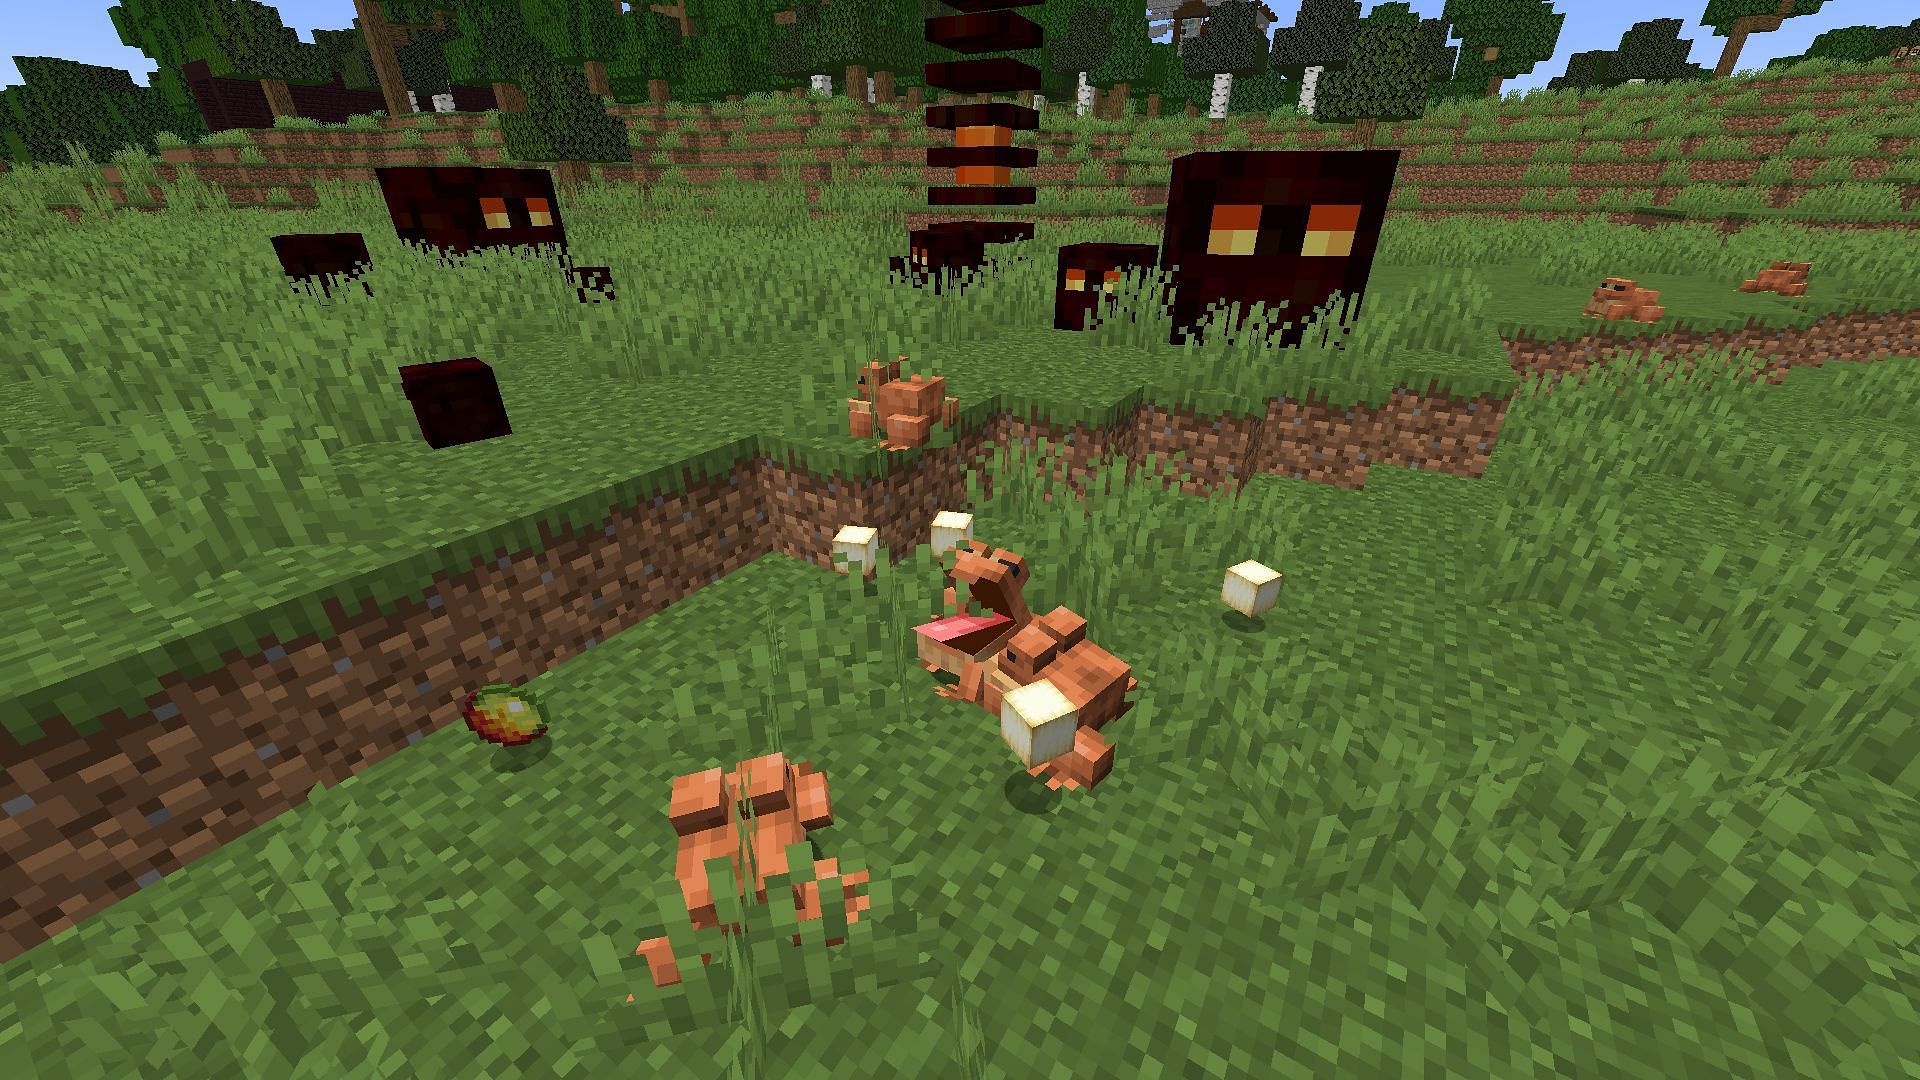 Frogs in The Wild Update (Image via Mojang)